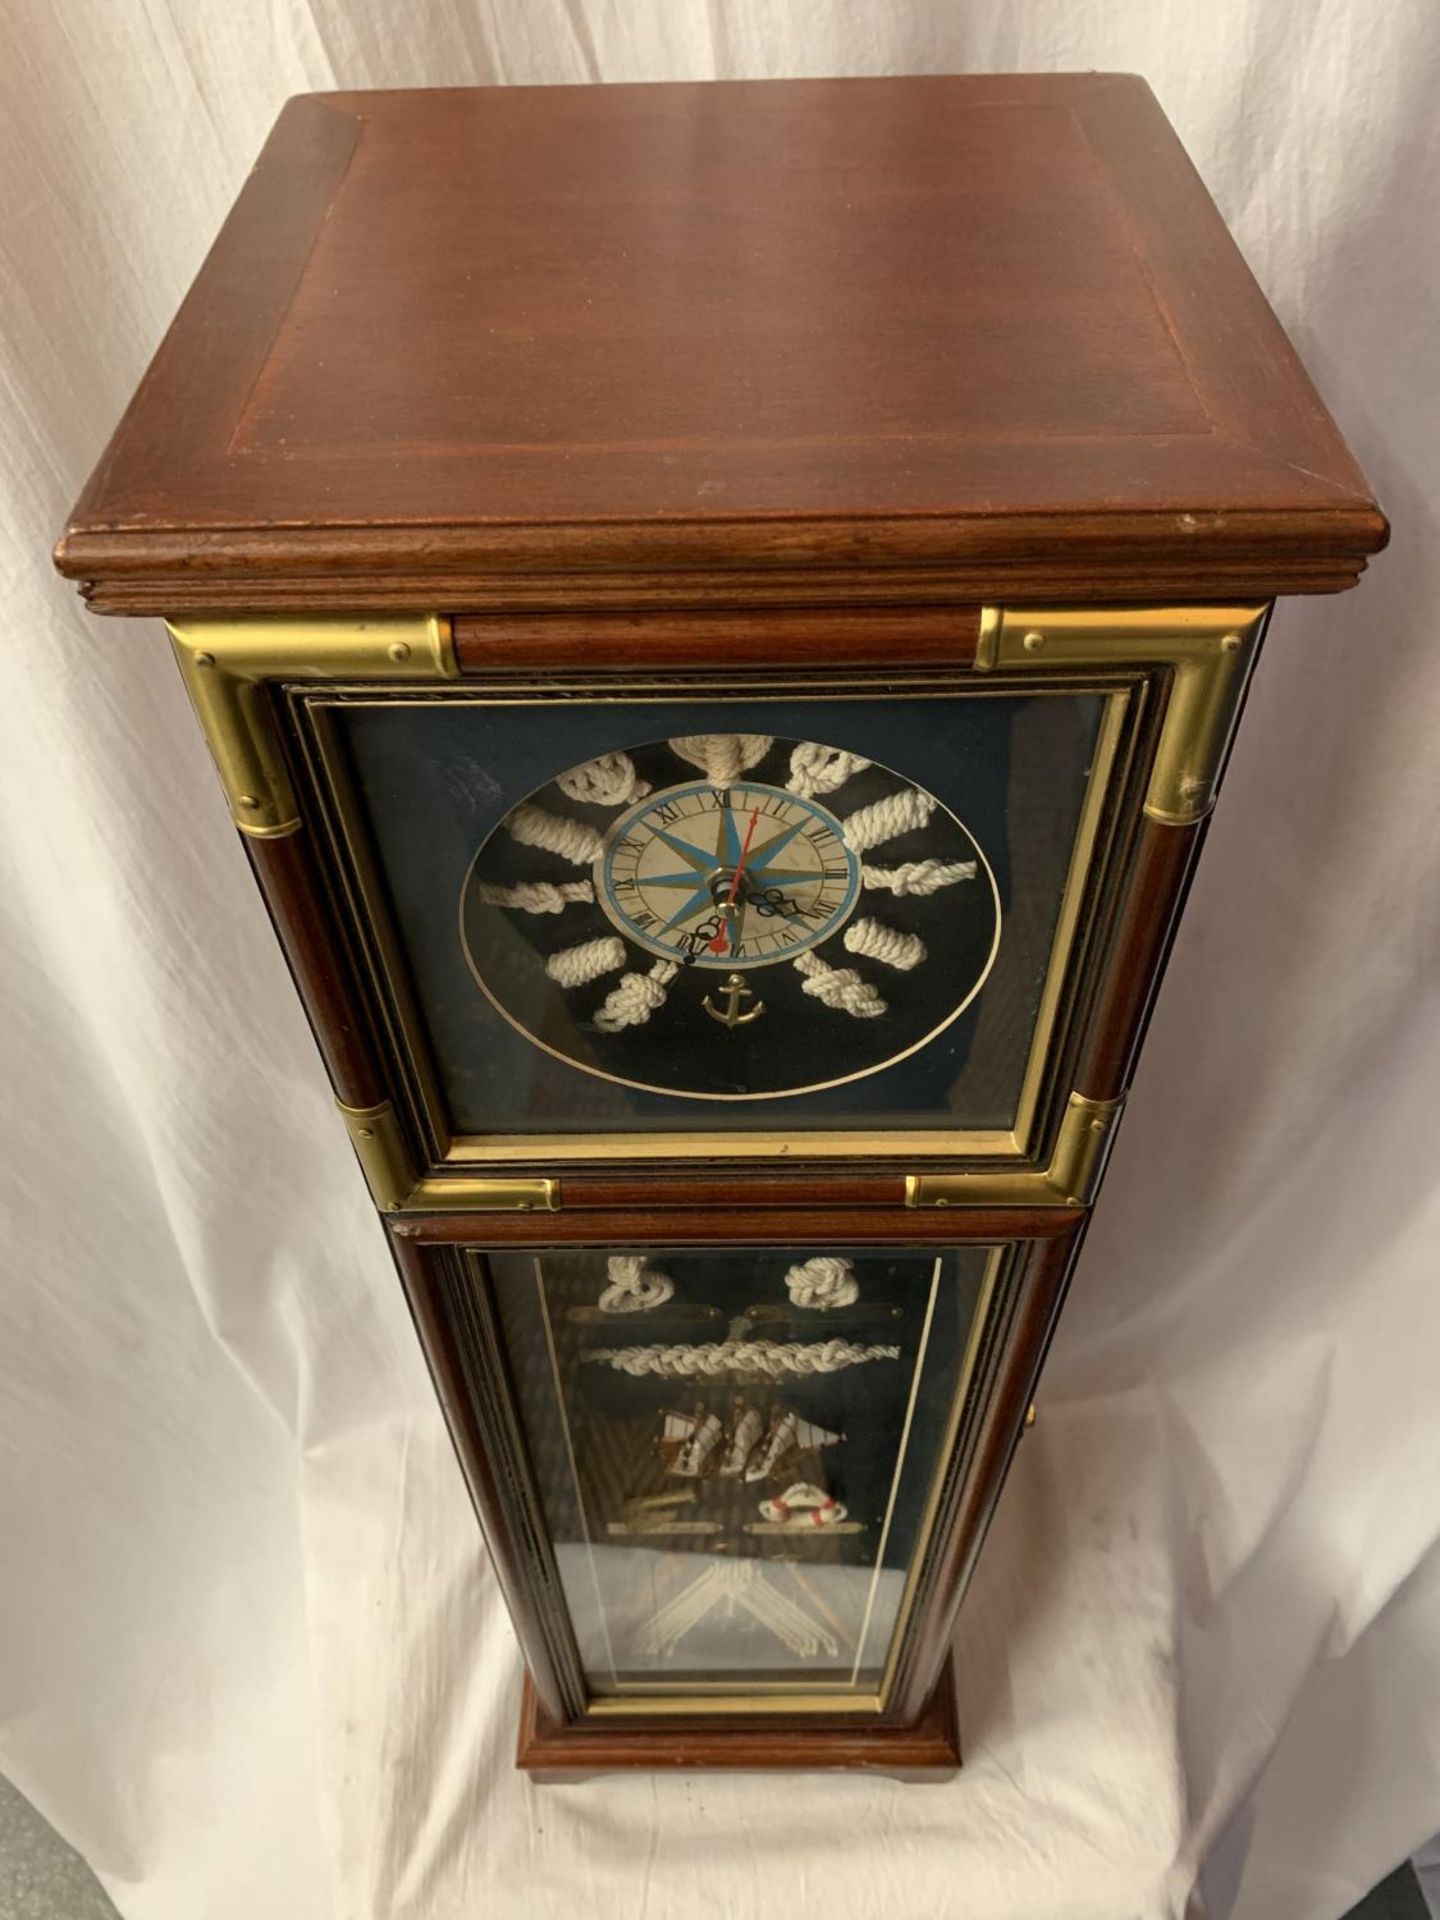 A TALL NAUTICAL CLOCK INCORPORATING FIVE INTERNAL SHELVES AND A COMPASS H: 80CM - Image 7 of 7